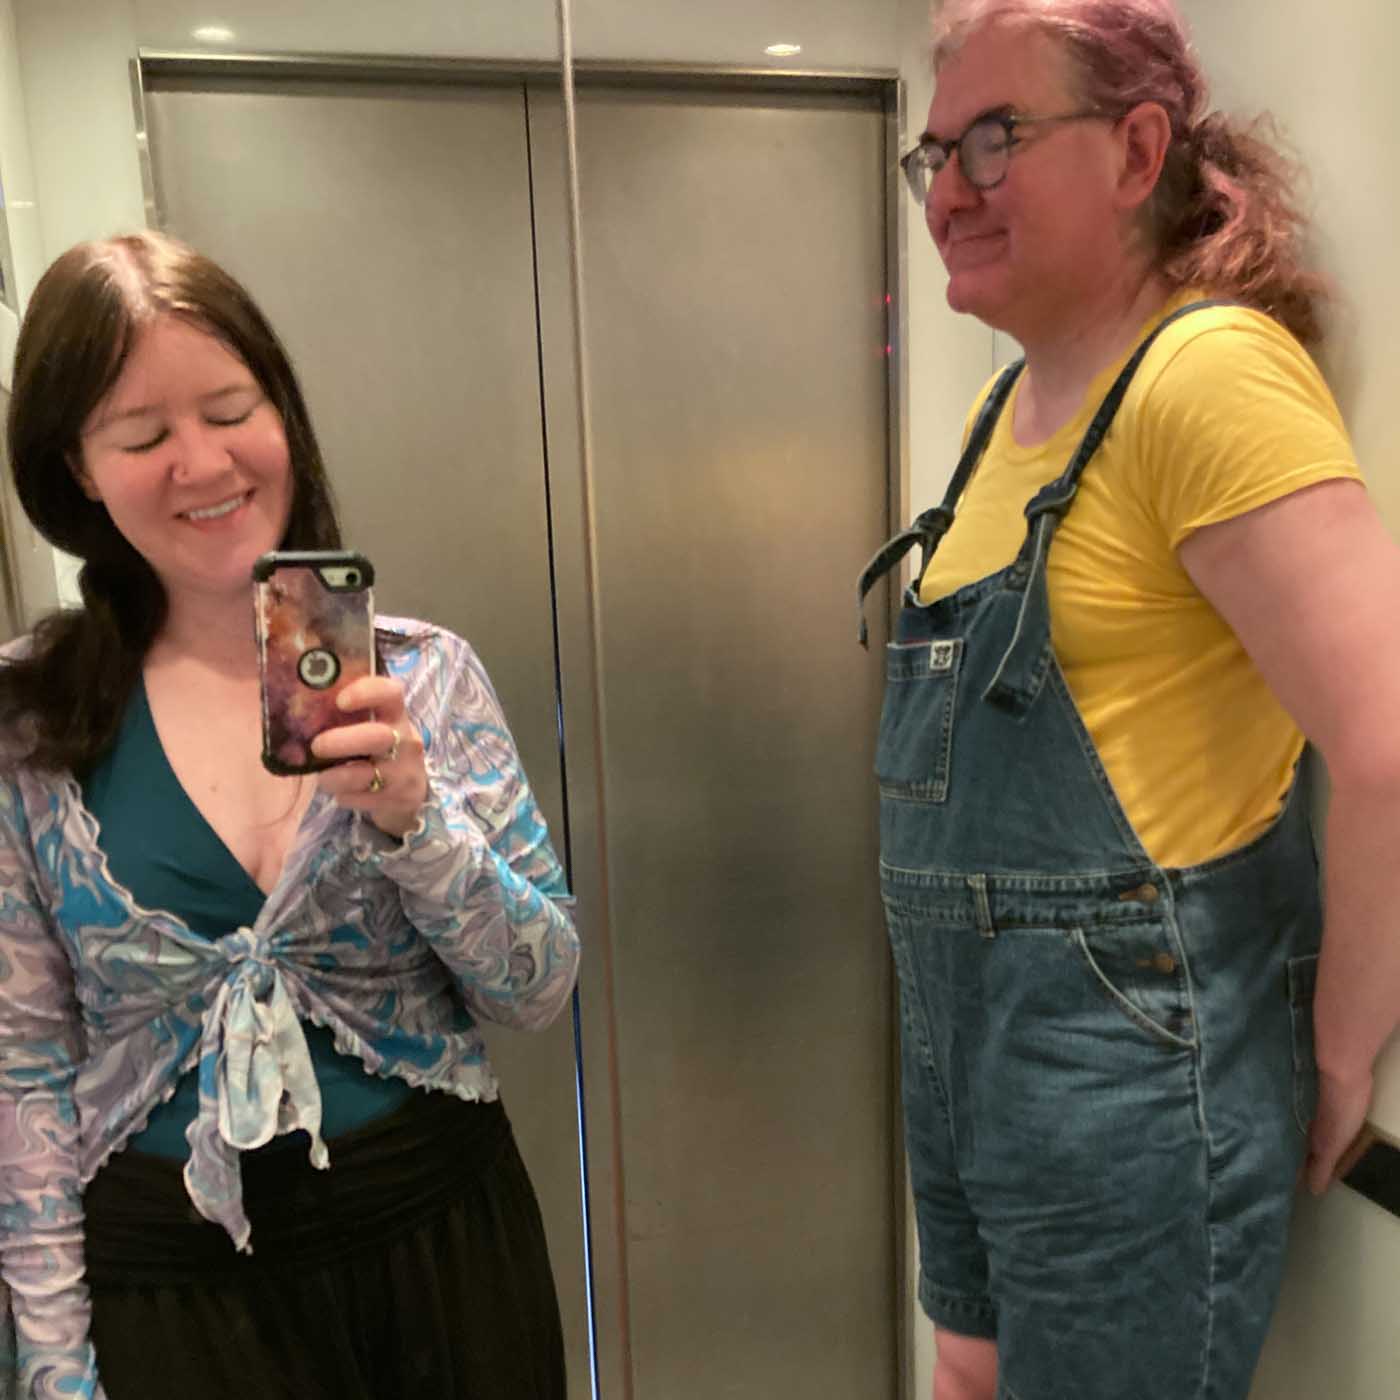 Two people are in a lift (elevator). The woman on the left is taking the picture with her phone, using the mirrored walls of the lift as a reflective screen. She has long straight hair, a fabric tie-top over a t-shirty type thing, and a skirt. She is smiling. The enby on the right is standing against the wall of the lift, taller than the woman so their gaze is over her head. They are wearing a yellow t-shirt and blue dungaree shorts, making them look a bit like a Minion.